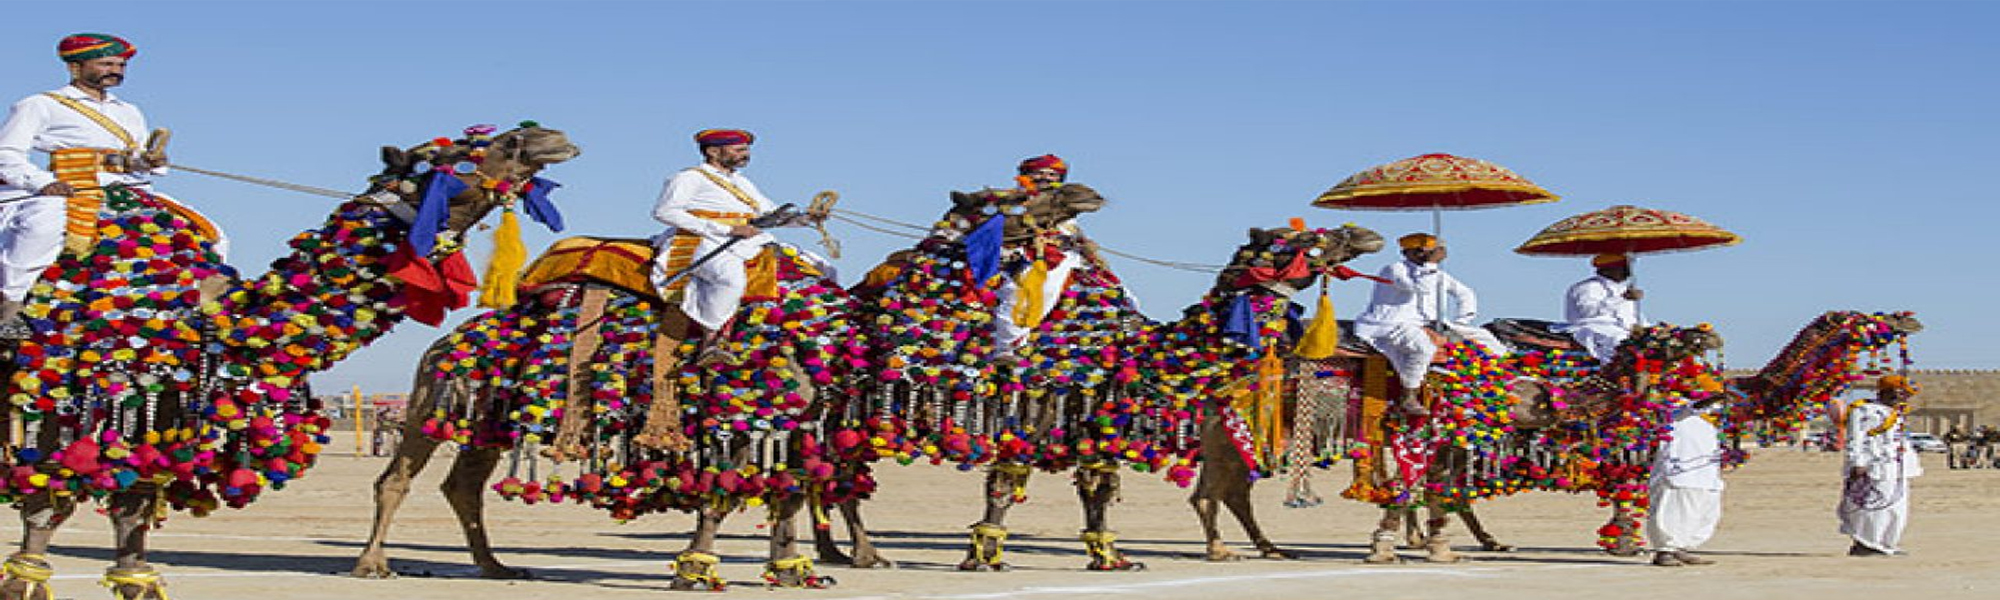 Camel Safari Tours in India with Desert Festival Tours in India  